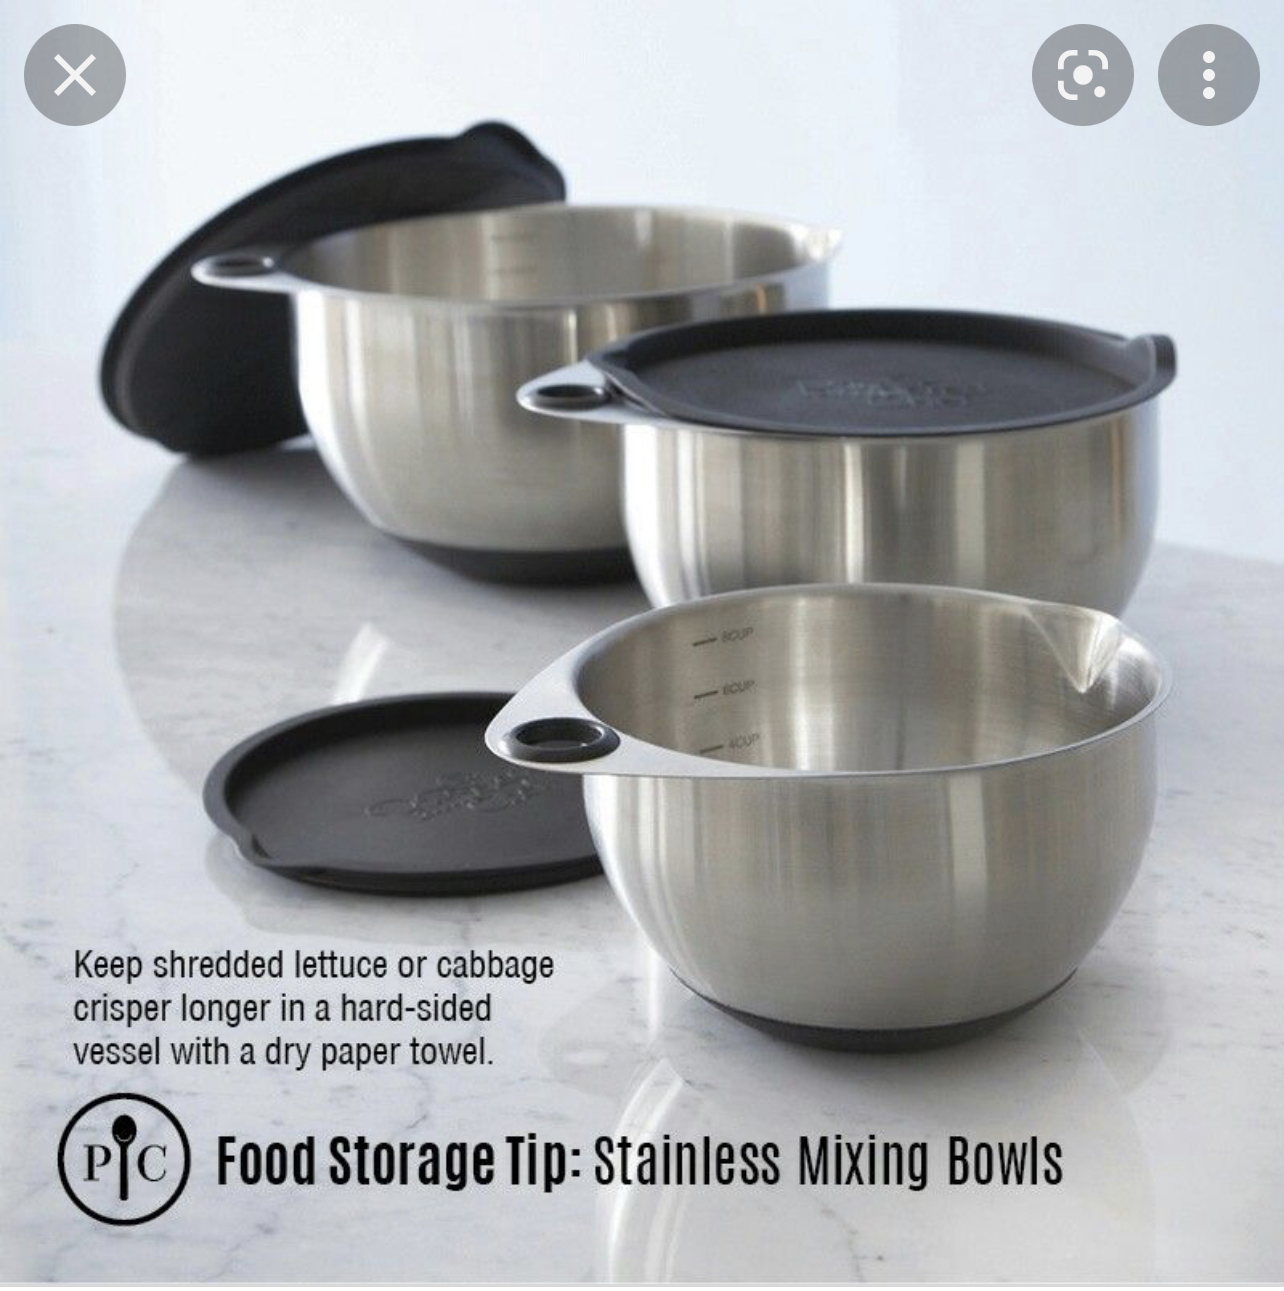 15. Stainless Mixing Bowls